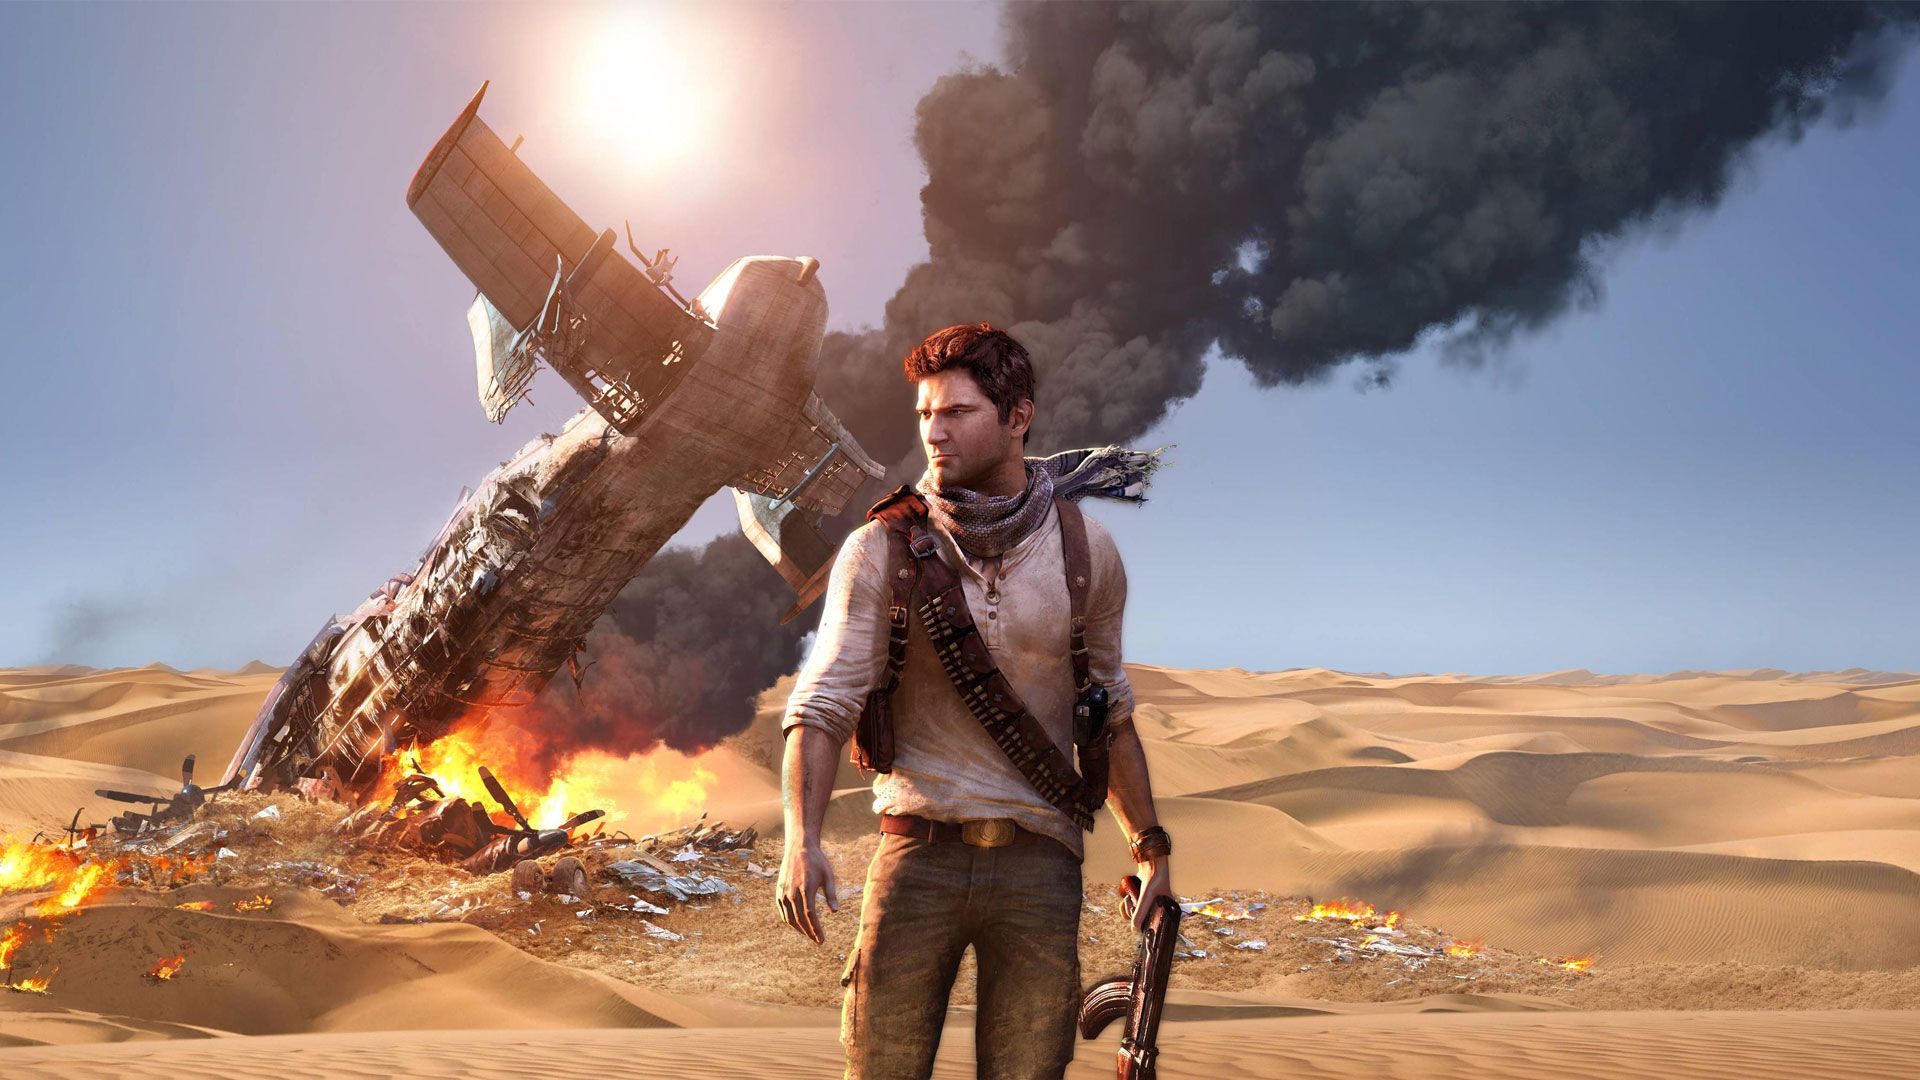 Uncharted film reportedly loses its director